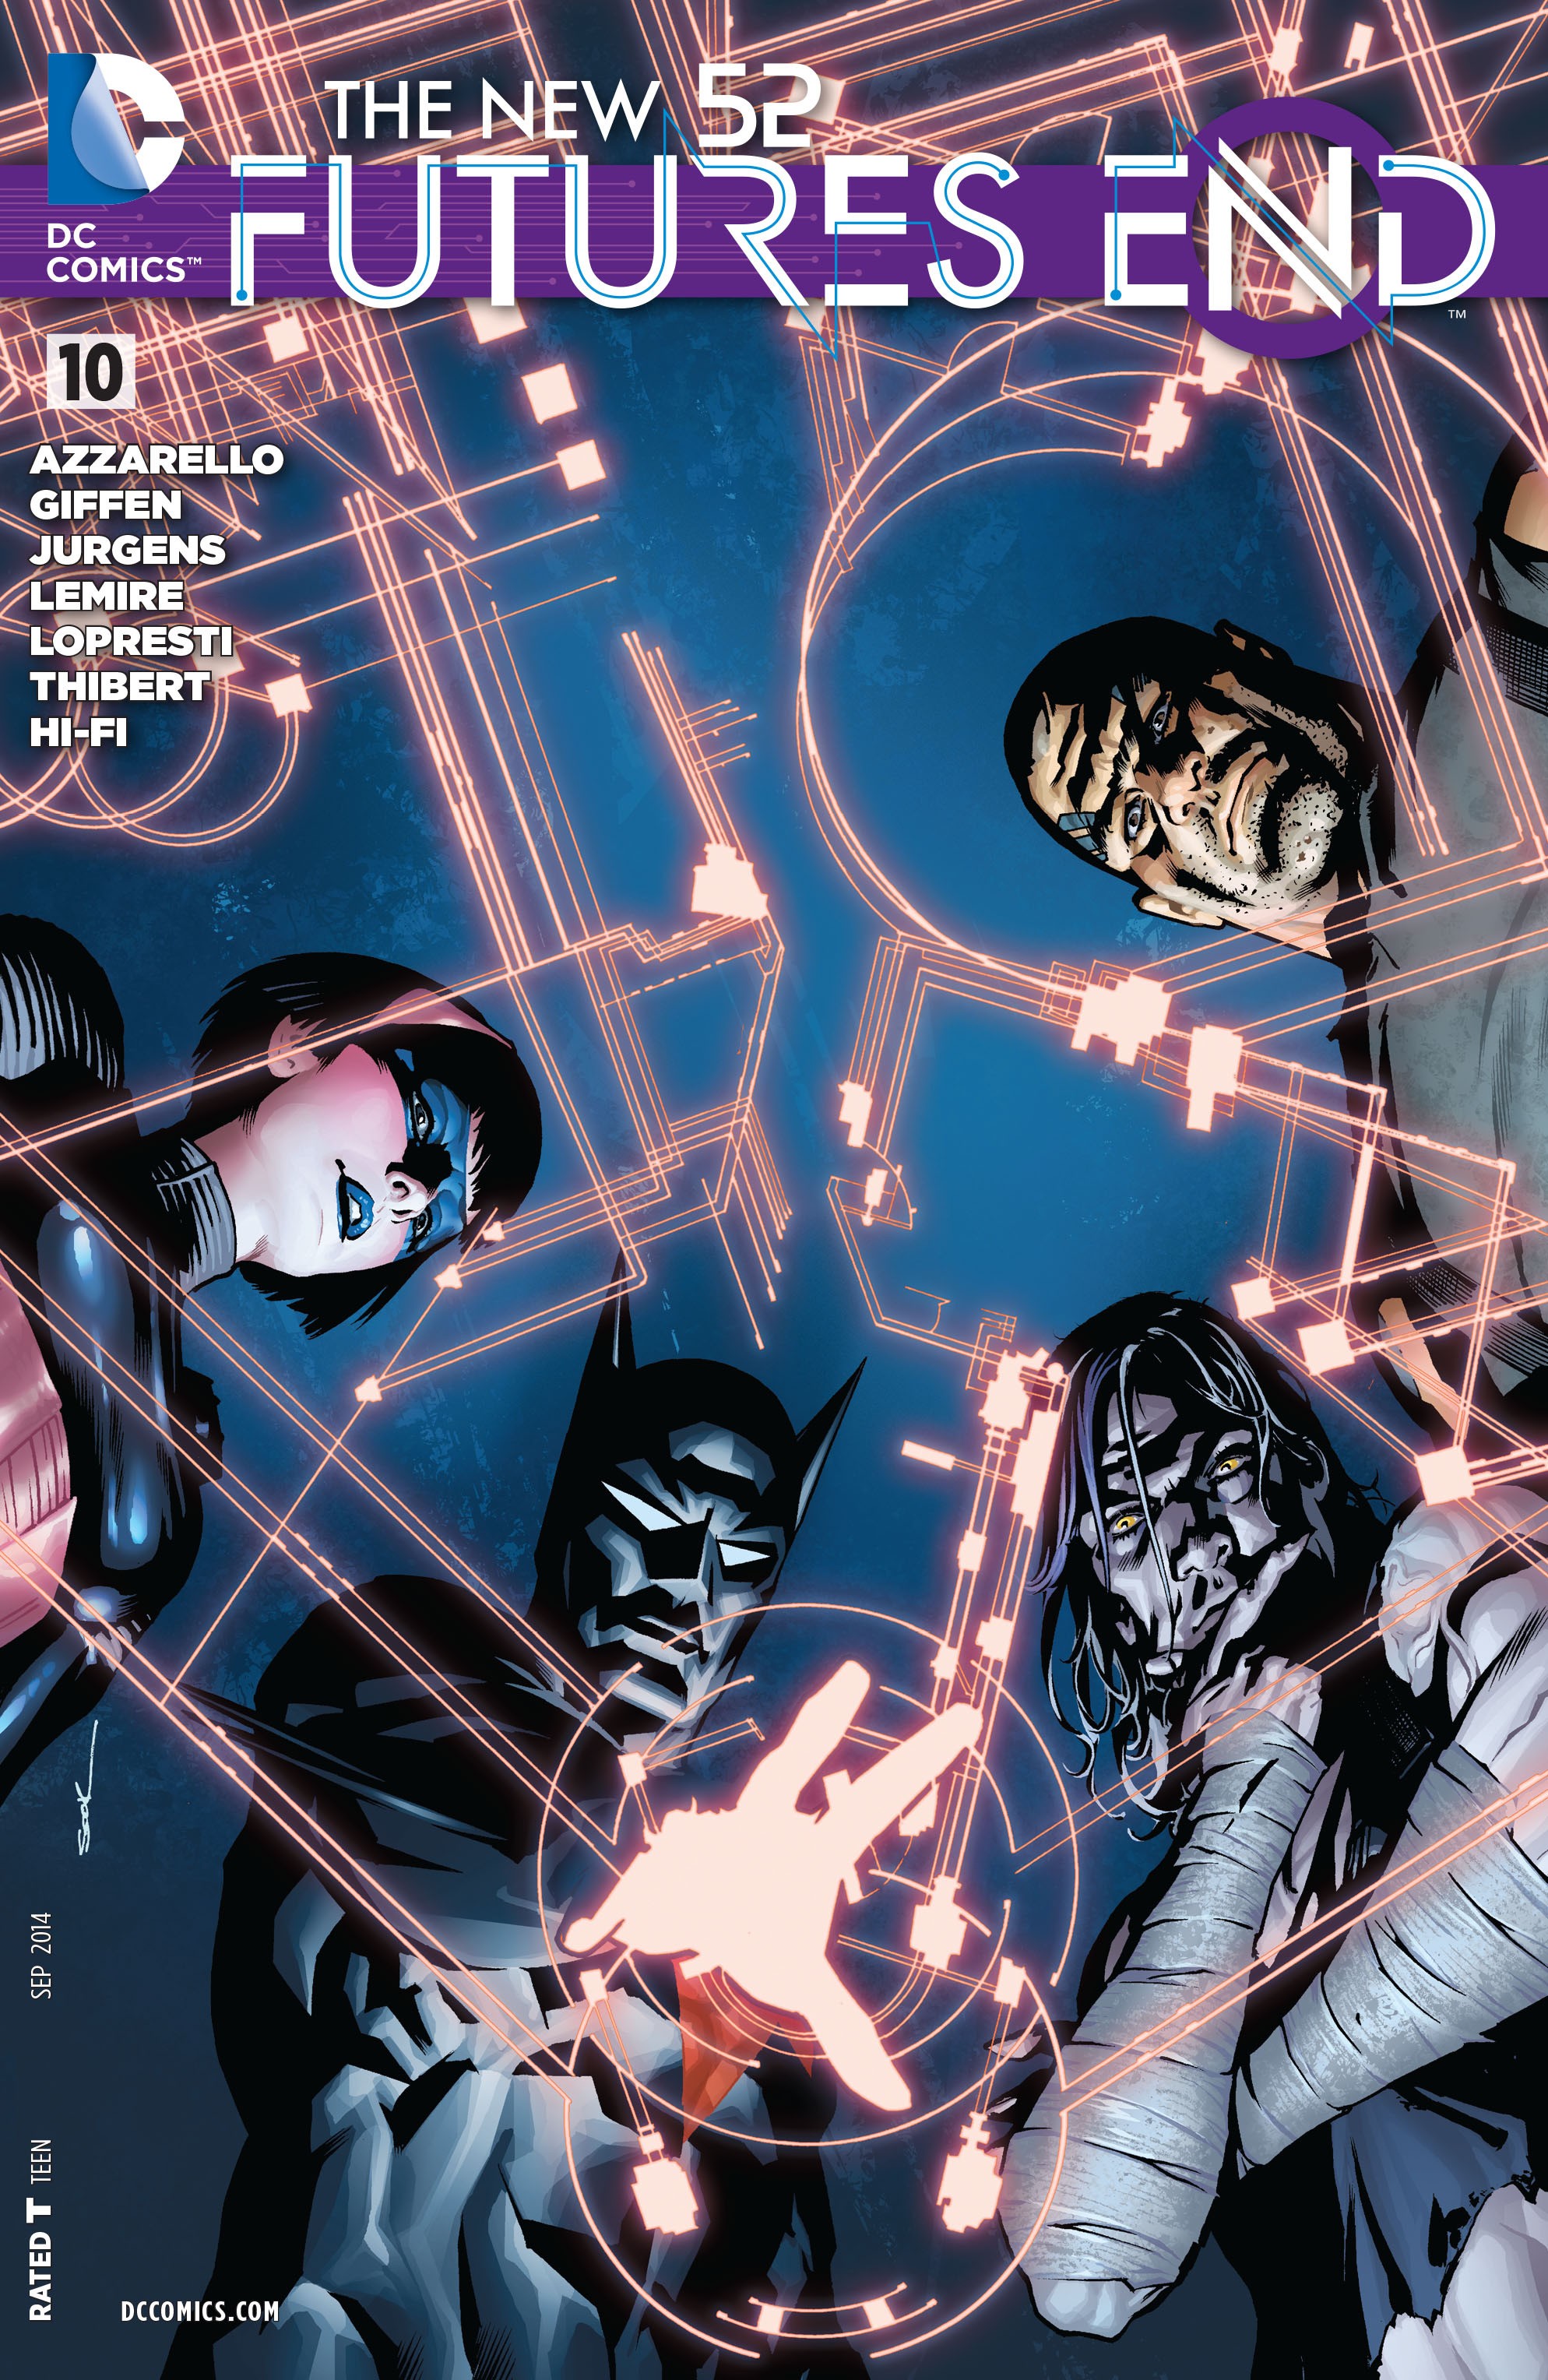 The New 52: Futures End Vol. 1 #10